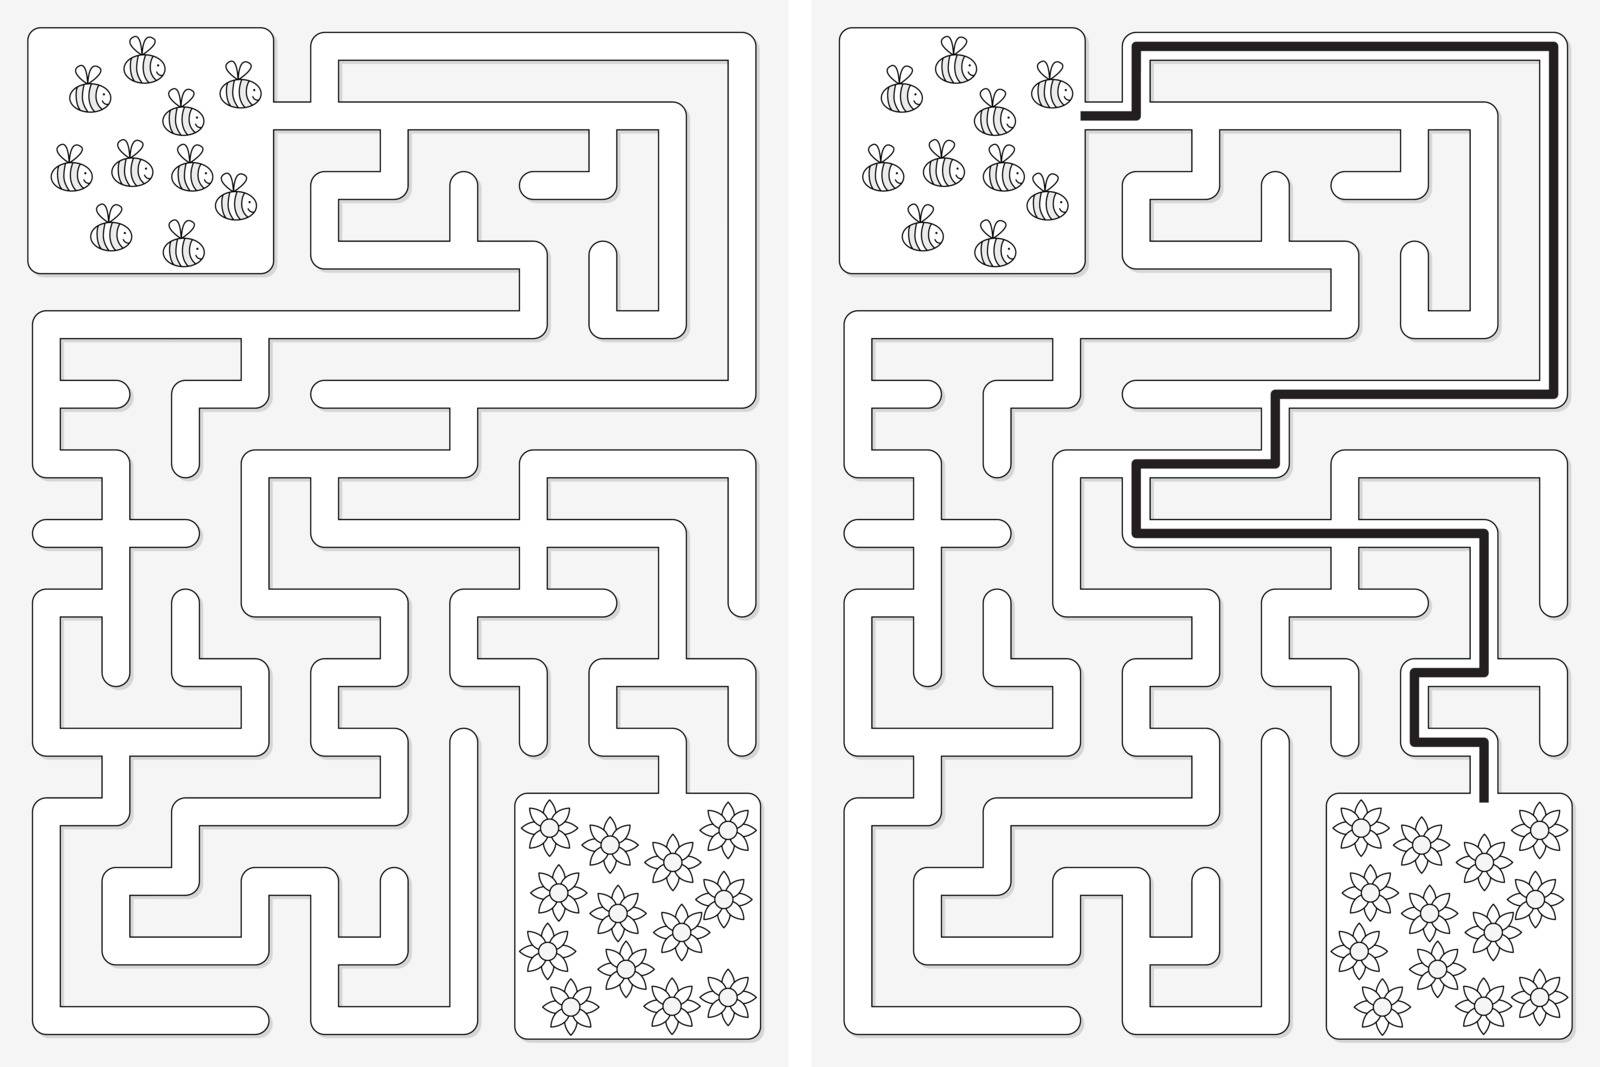 Easy little bees and flowers maze for kids with a solution iin black and white